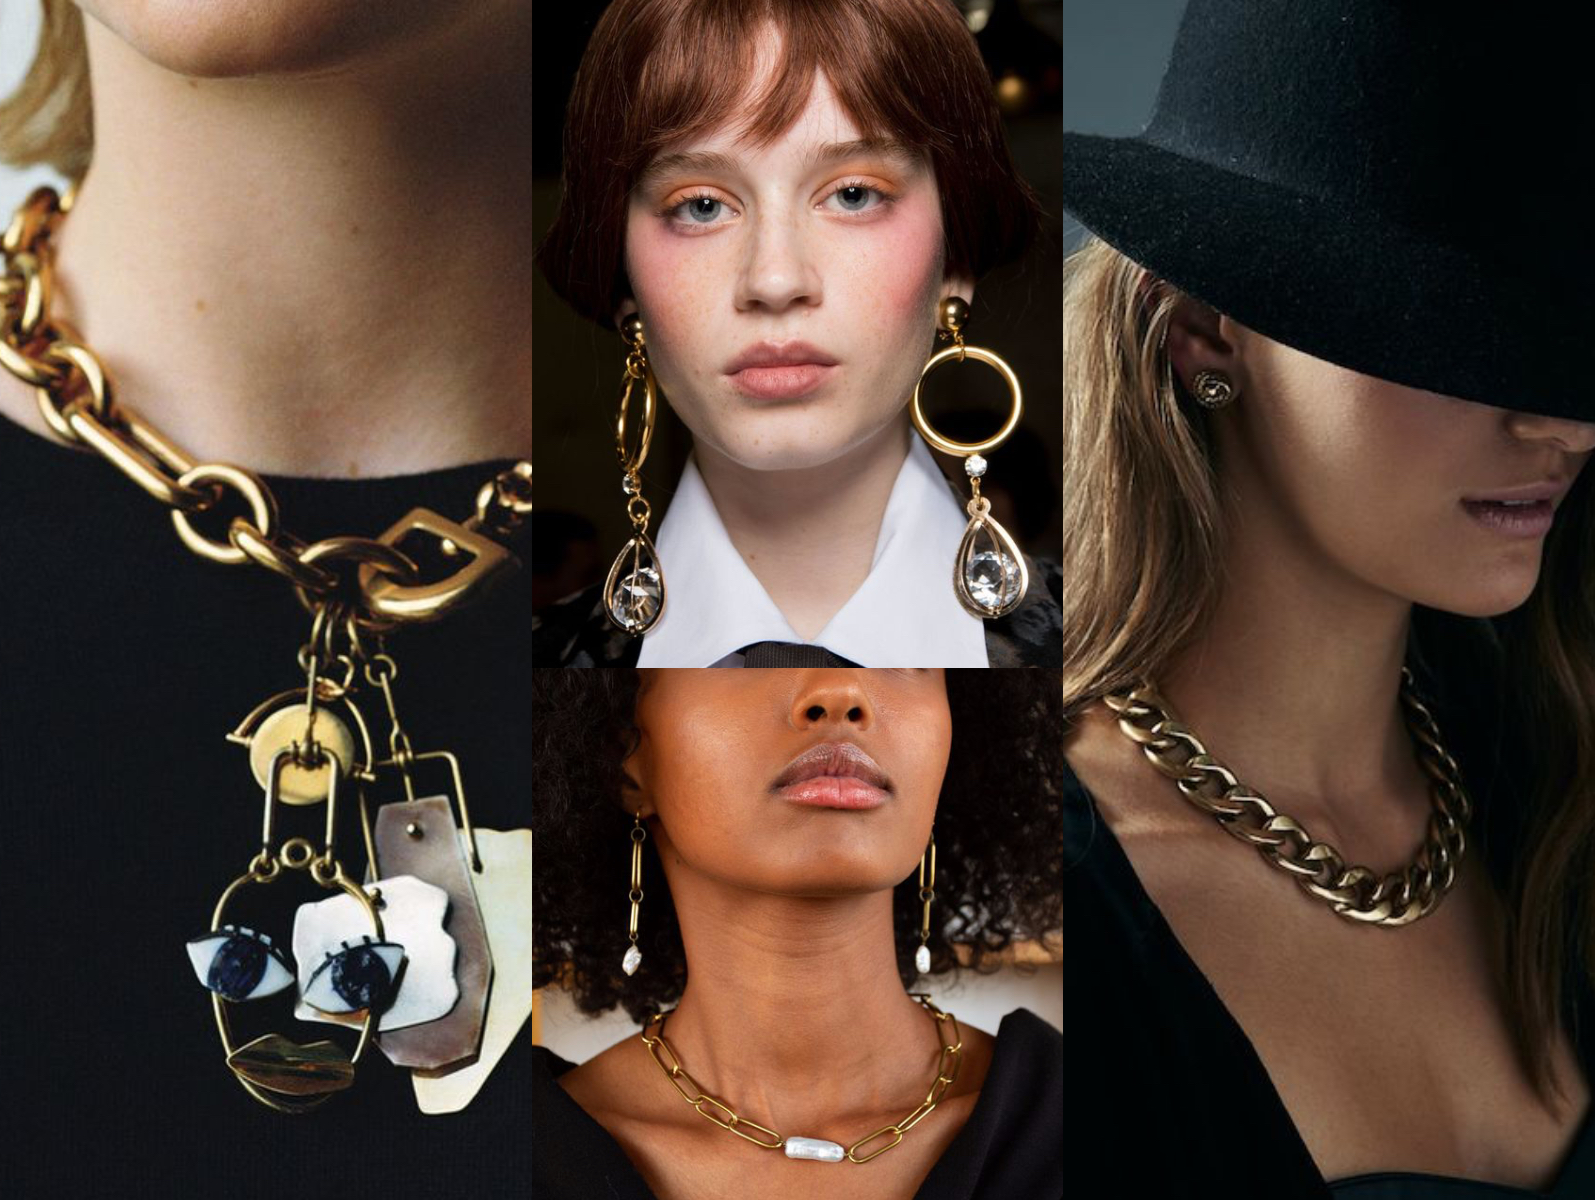 The Chunky Chain Jewelry Trend Is Everywhere, From Necklaces To Earrings